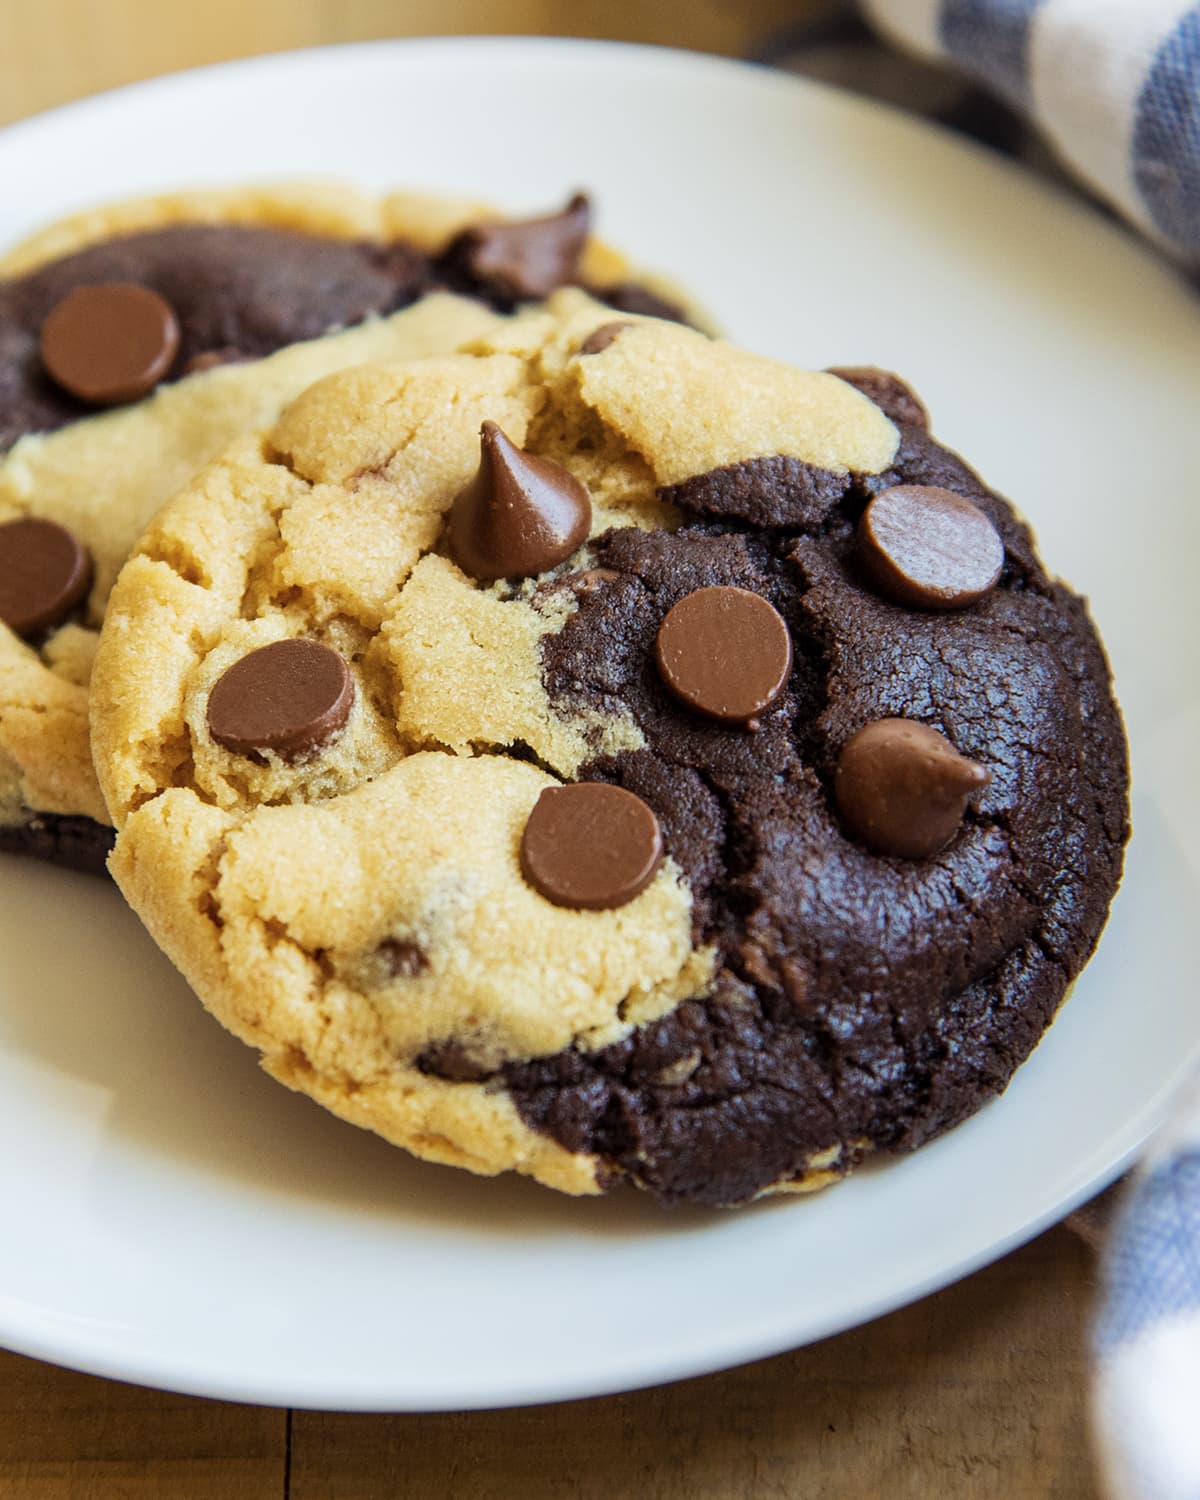 https://lmld.org/wp-content/uploads/2013/05/Chocolate-Peanut-Butter-Marbled-Cookies-9-1.jpg